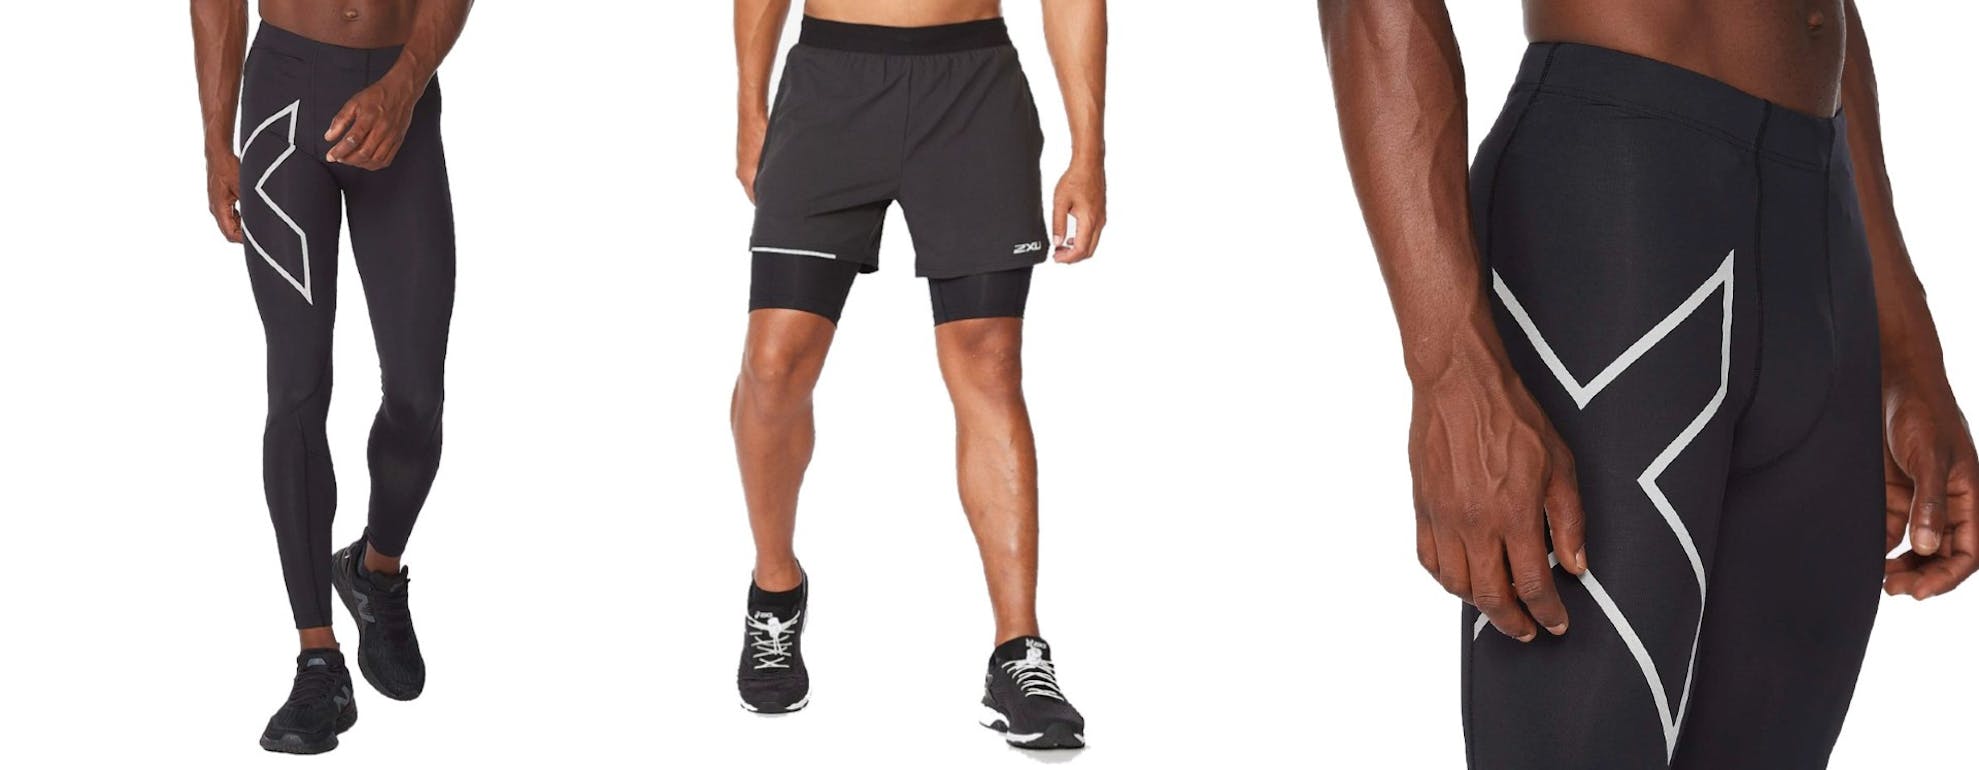 Do You Really Need to Spend $120 on Compression Clothing?